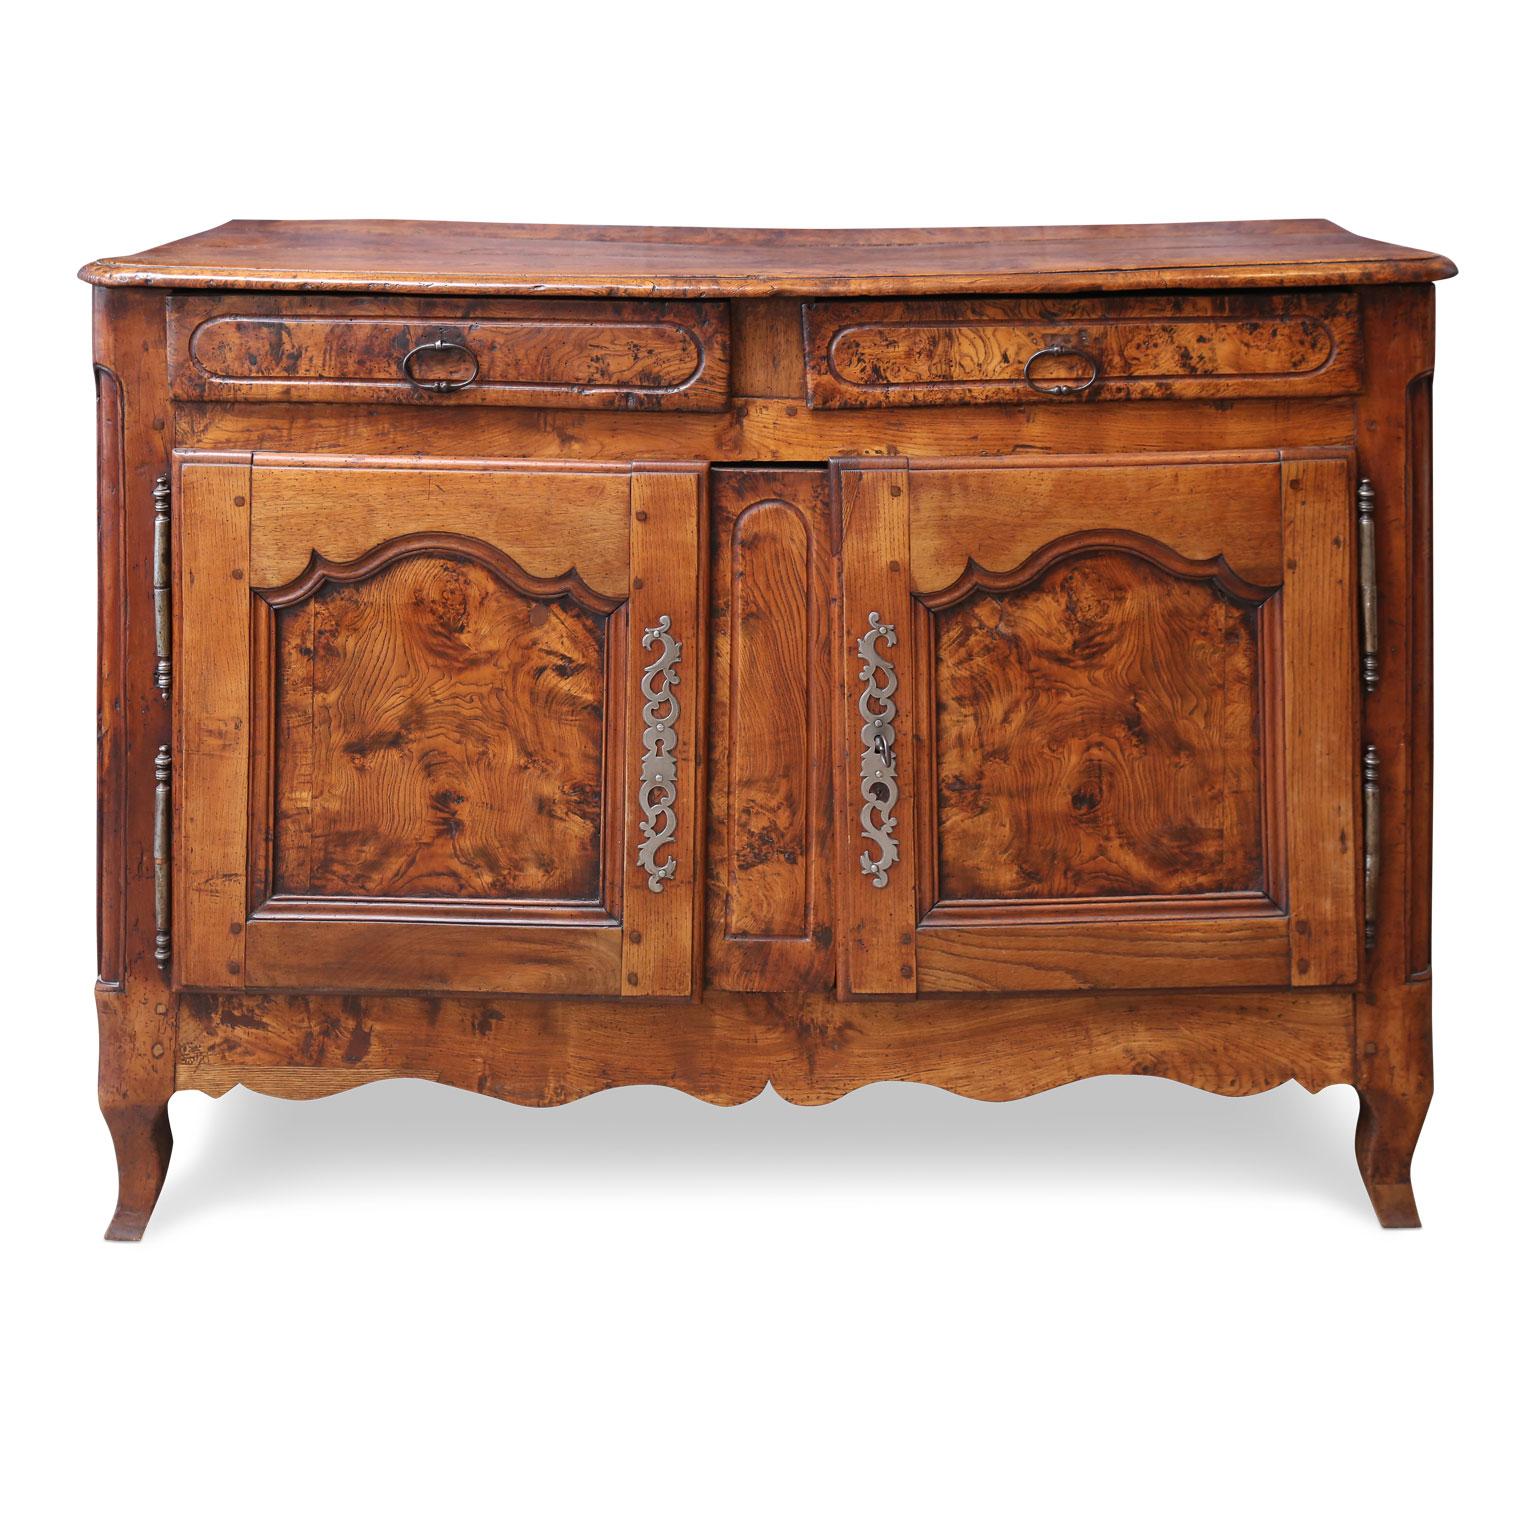 Burl ash French buffet, circa 1860, with two dovetailed drawers, two shaped panel doors above a shaped lower edge, an interior shelf and working locks with a key.